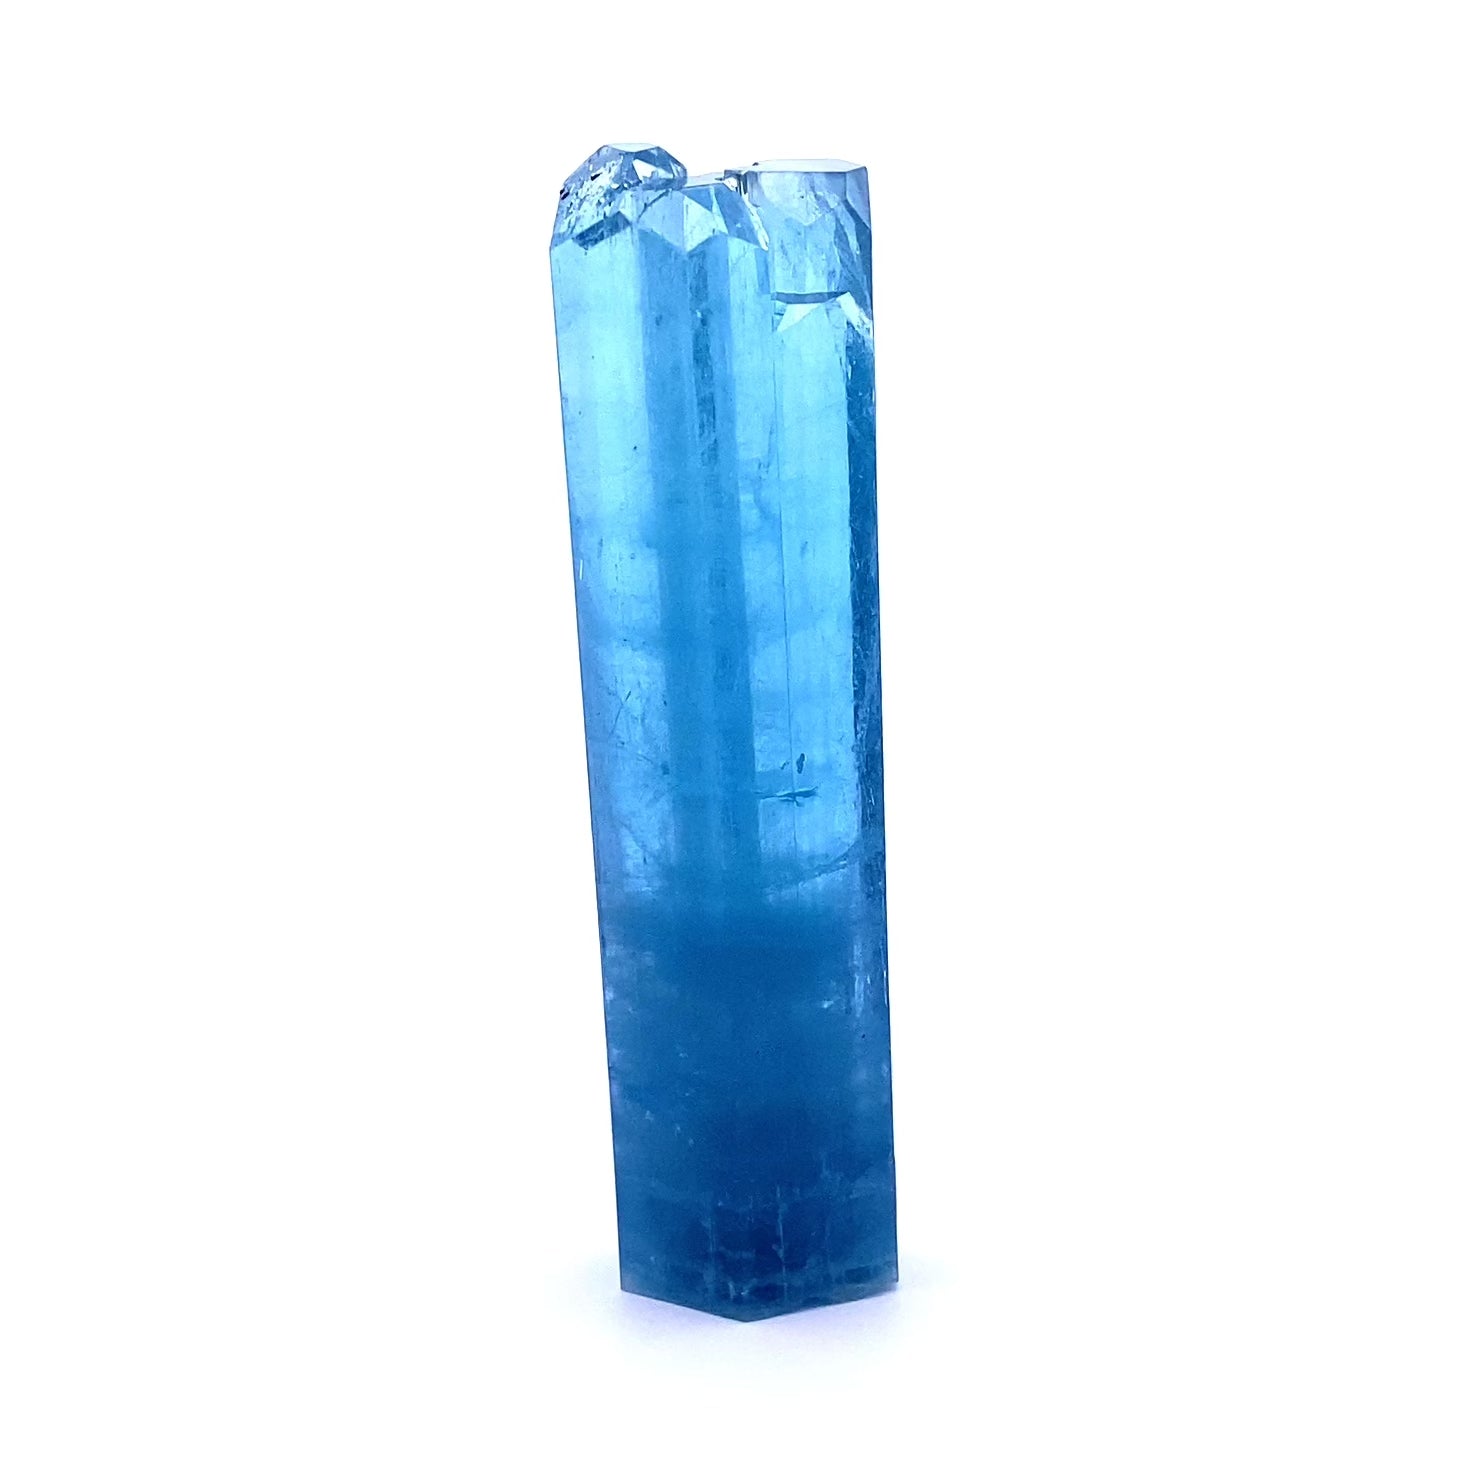 Aquamarine: Brilliant blue color with multiple terminations at the top sits in high contrast on white background, spinning on turntable. From Vietnam. All natural smooth, lustrous edges.